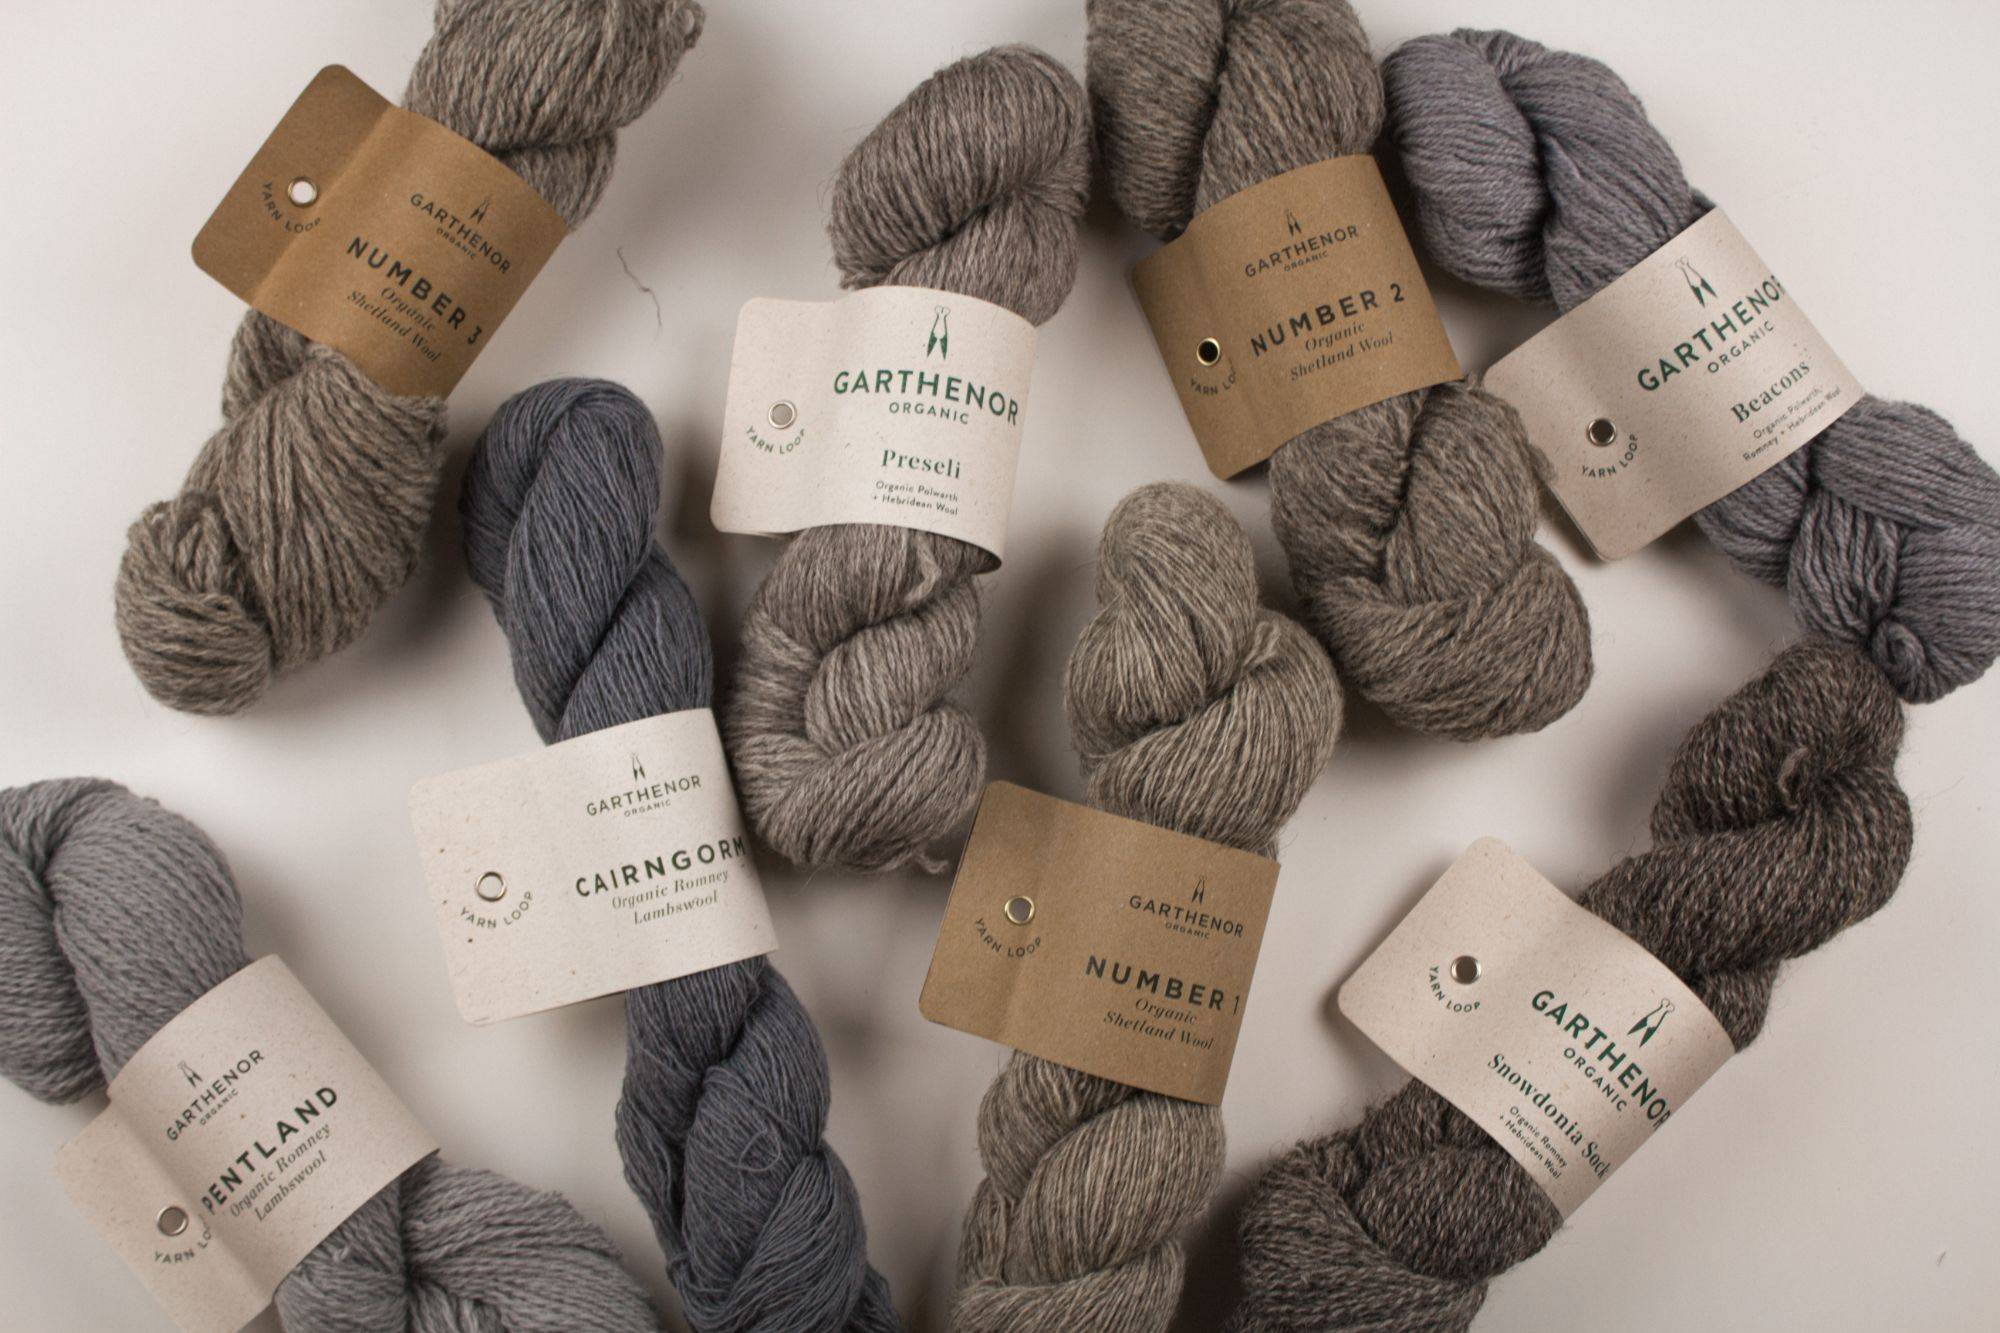 How to choose the correct yarn